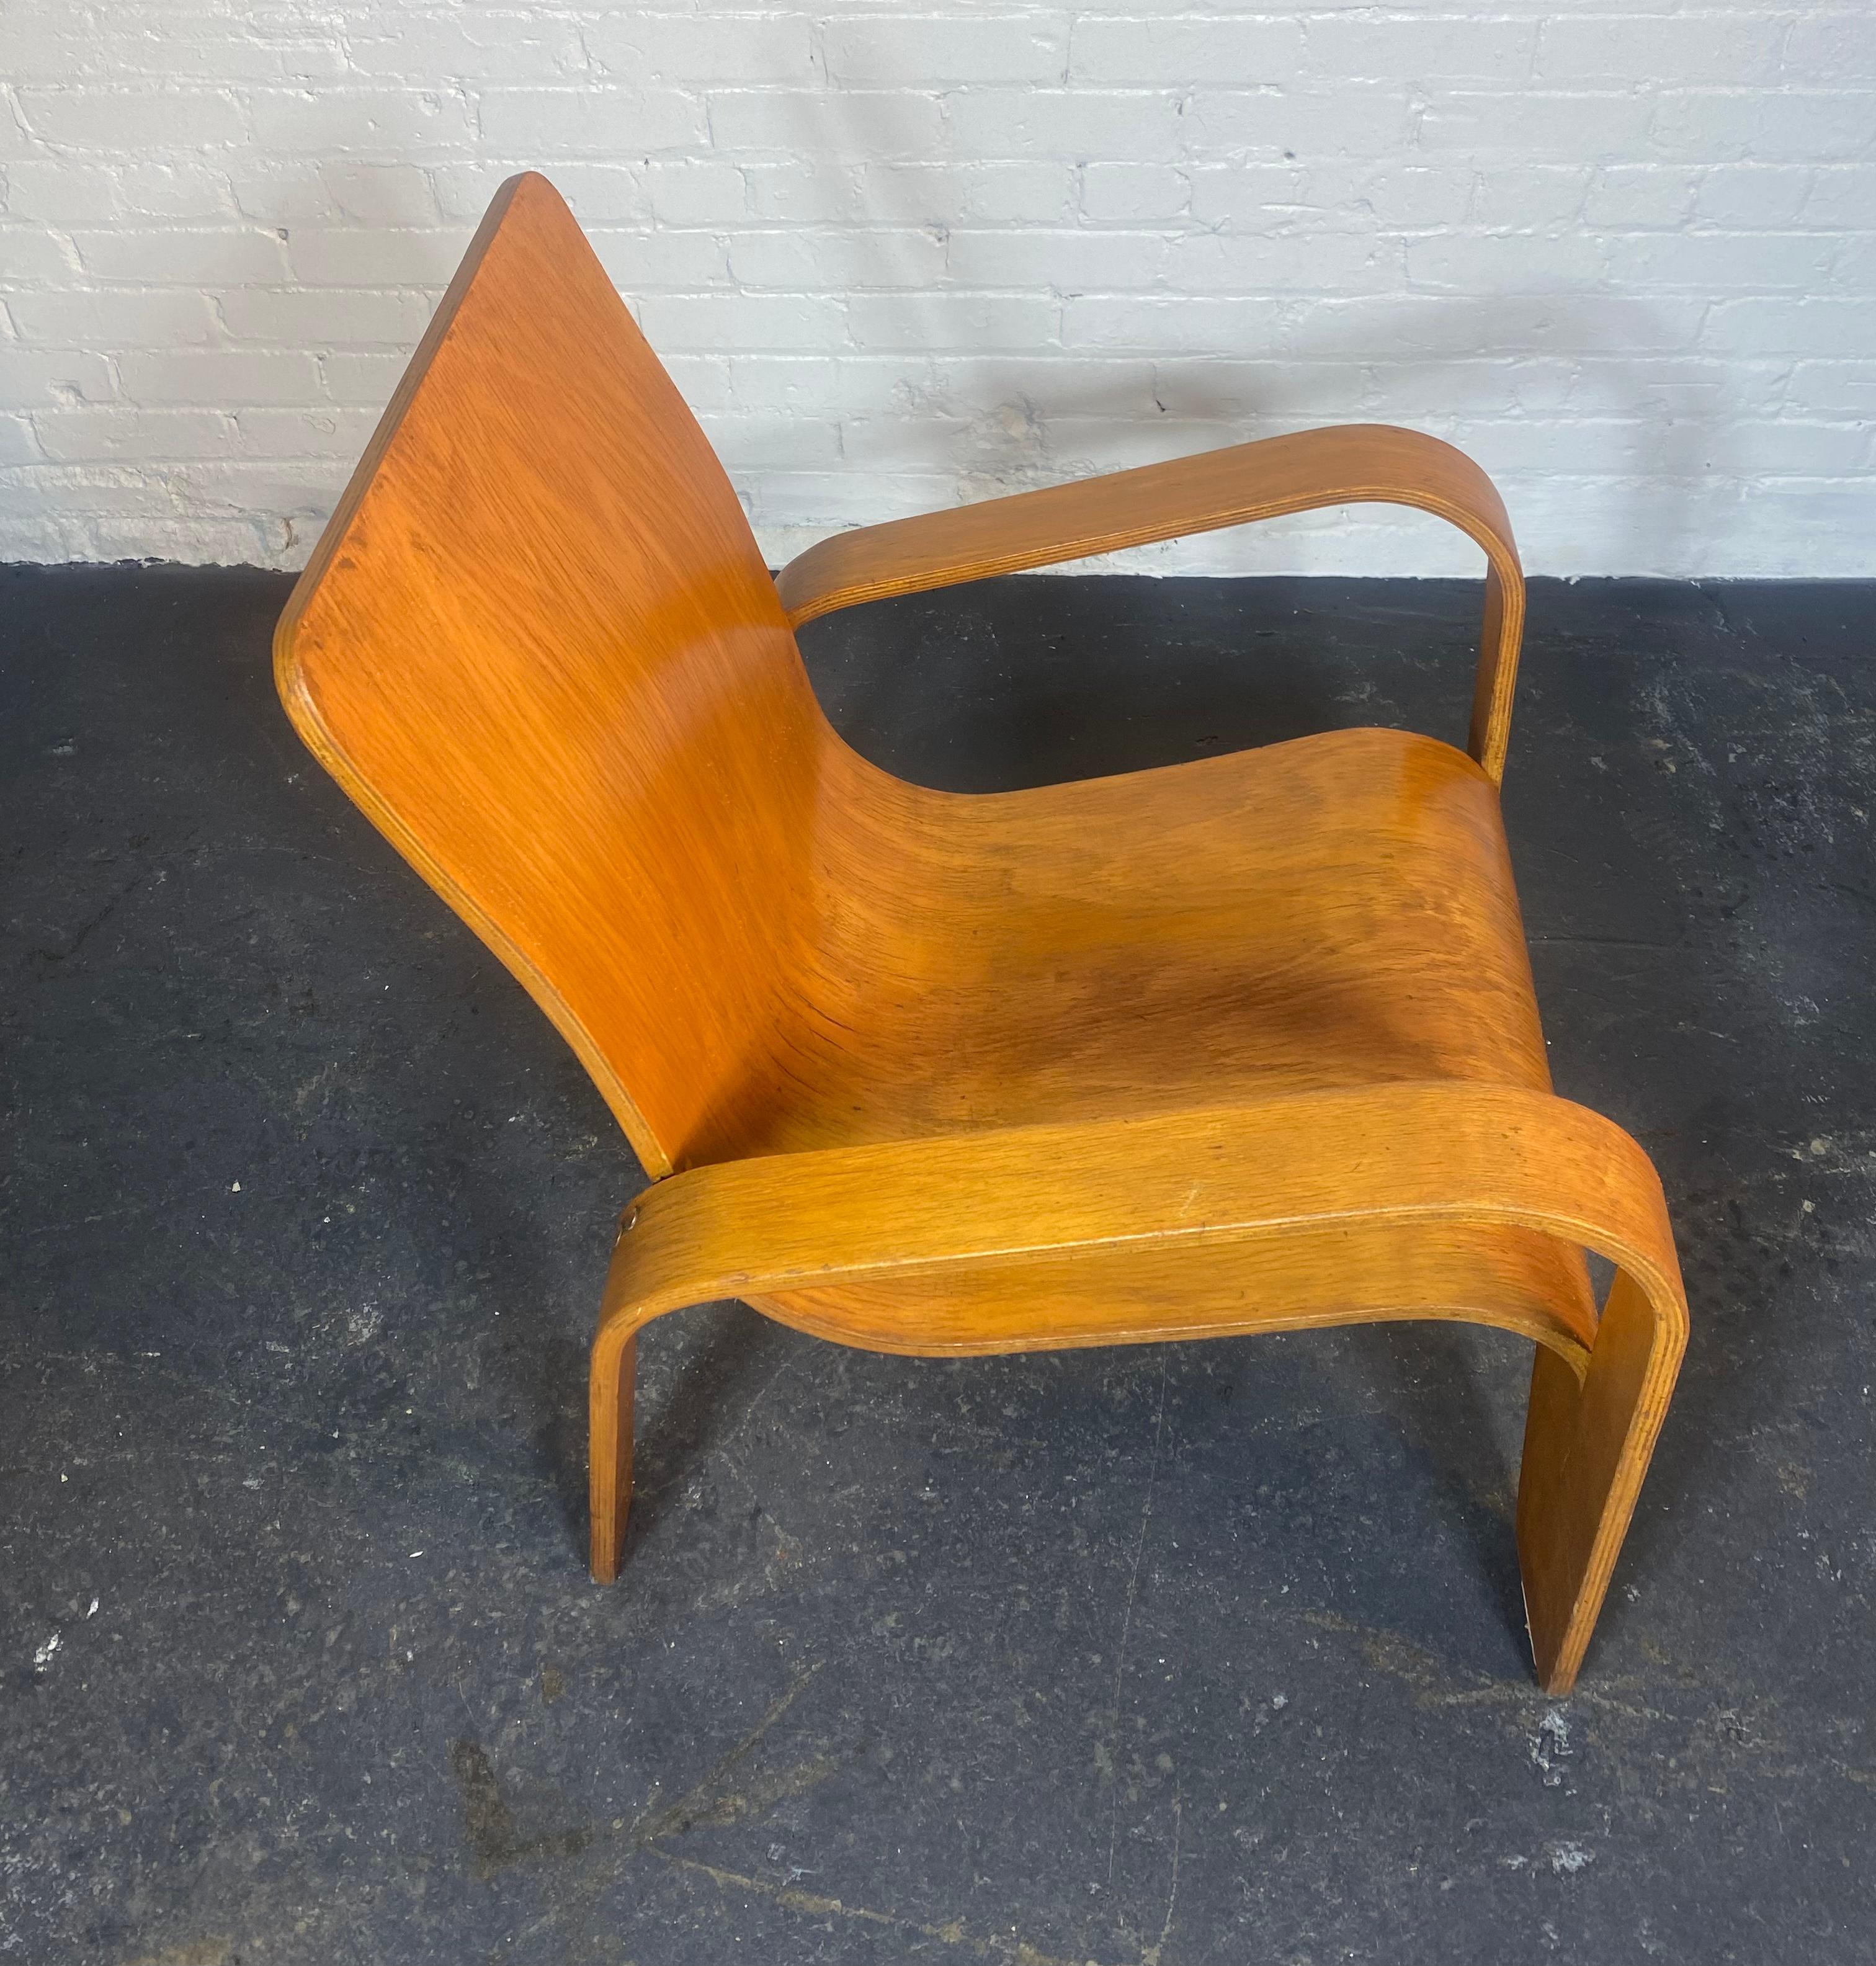 LaWo1 Molded Plywood Lounge Chair by Han Pieck for Lawo Ommen/ Netherlands 1945 In Good Condition For Sale In Buffalo, NY